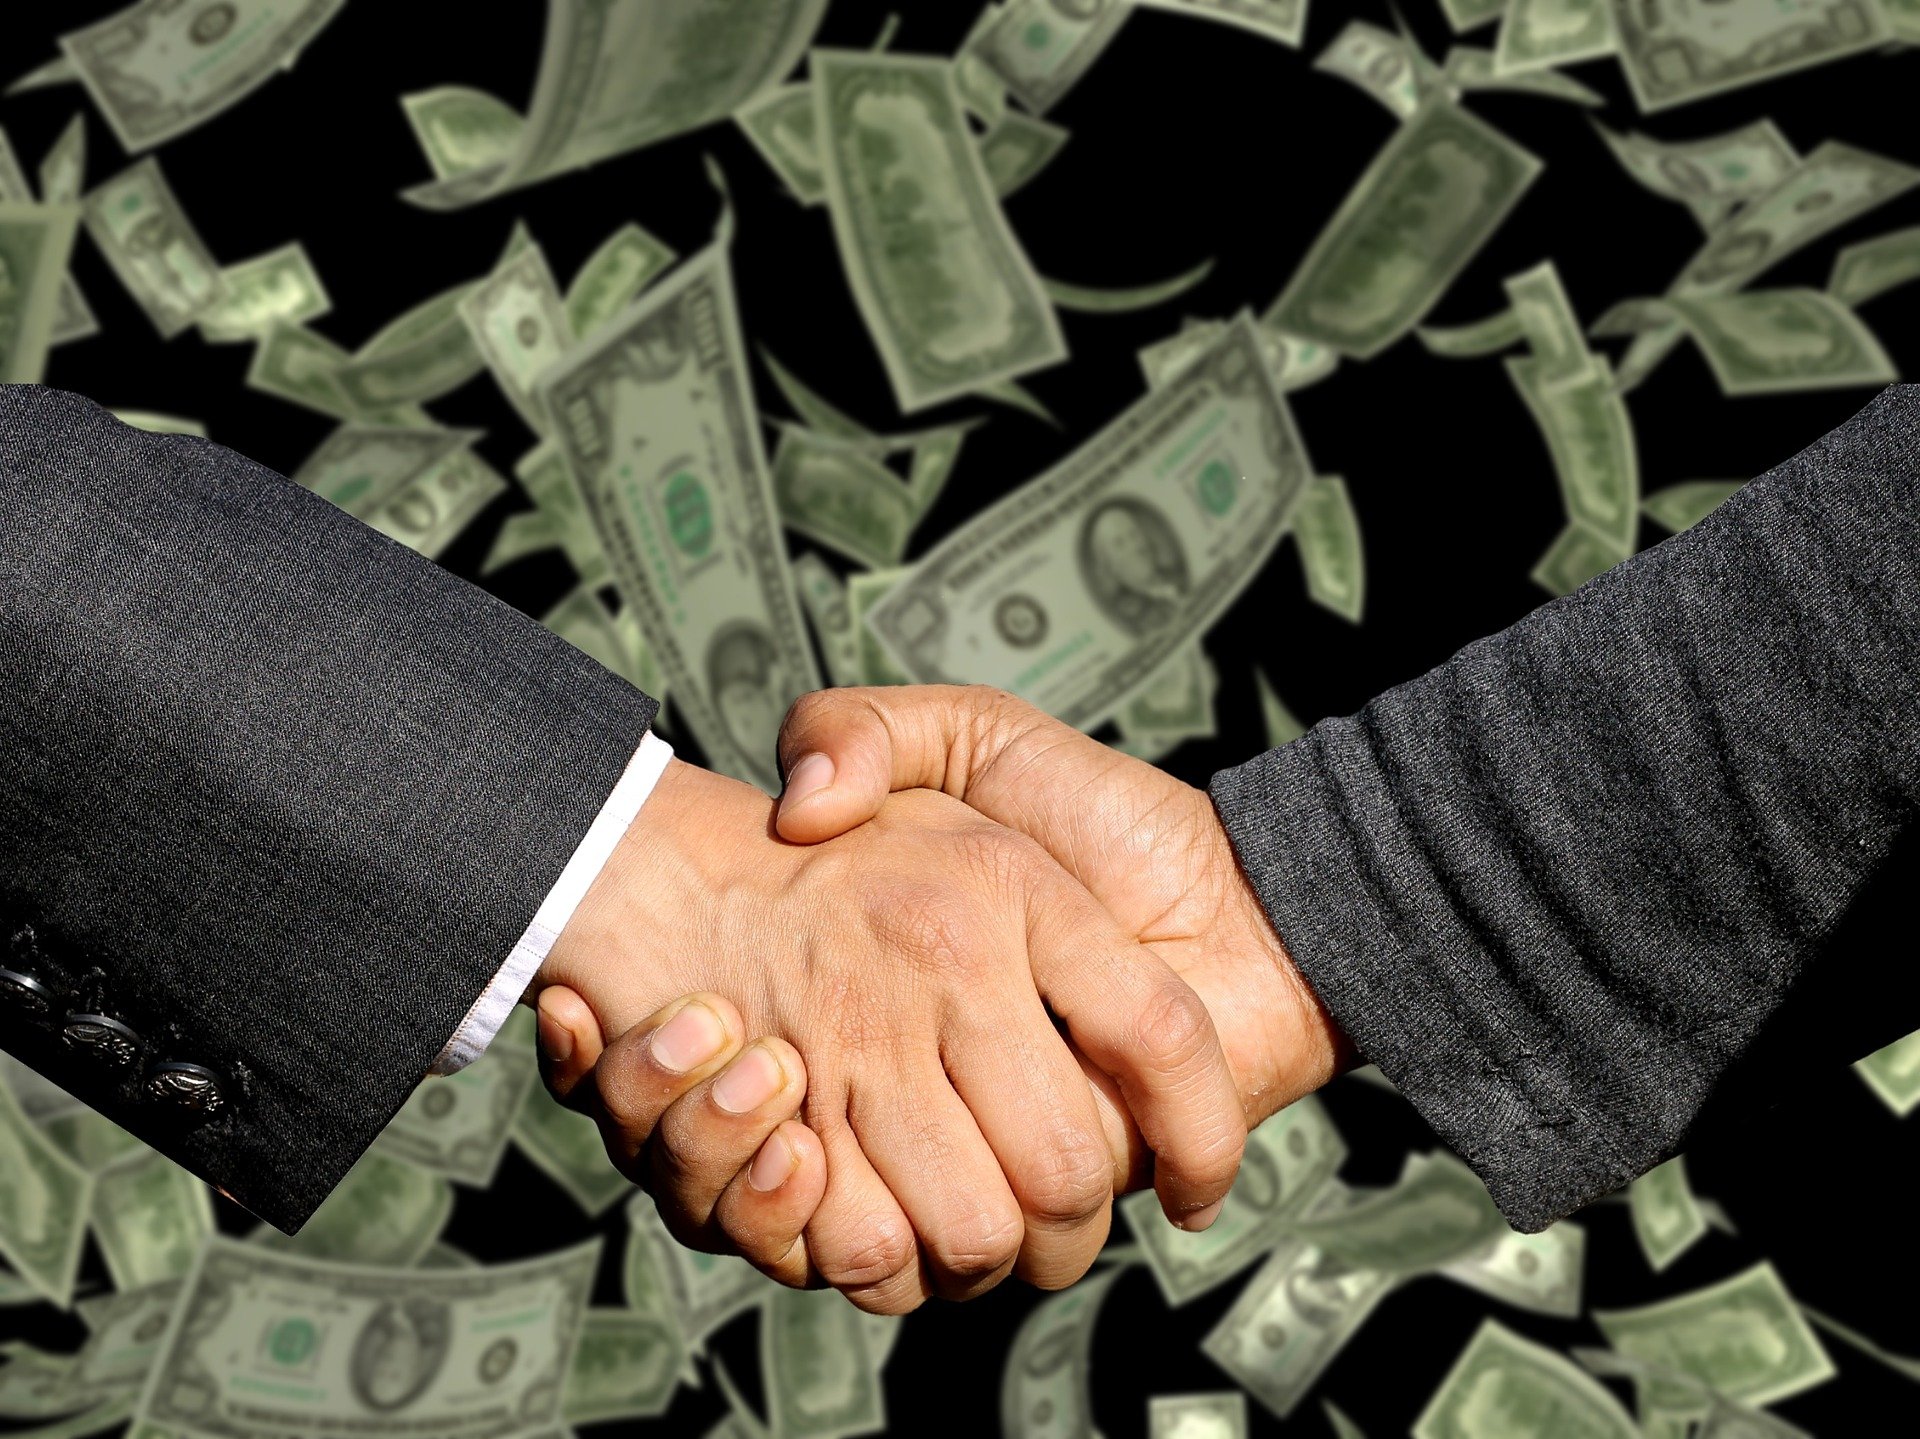 Two people shake hands after making a business deal. | Source: Pixabay.